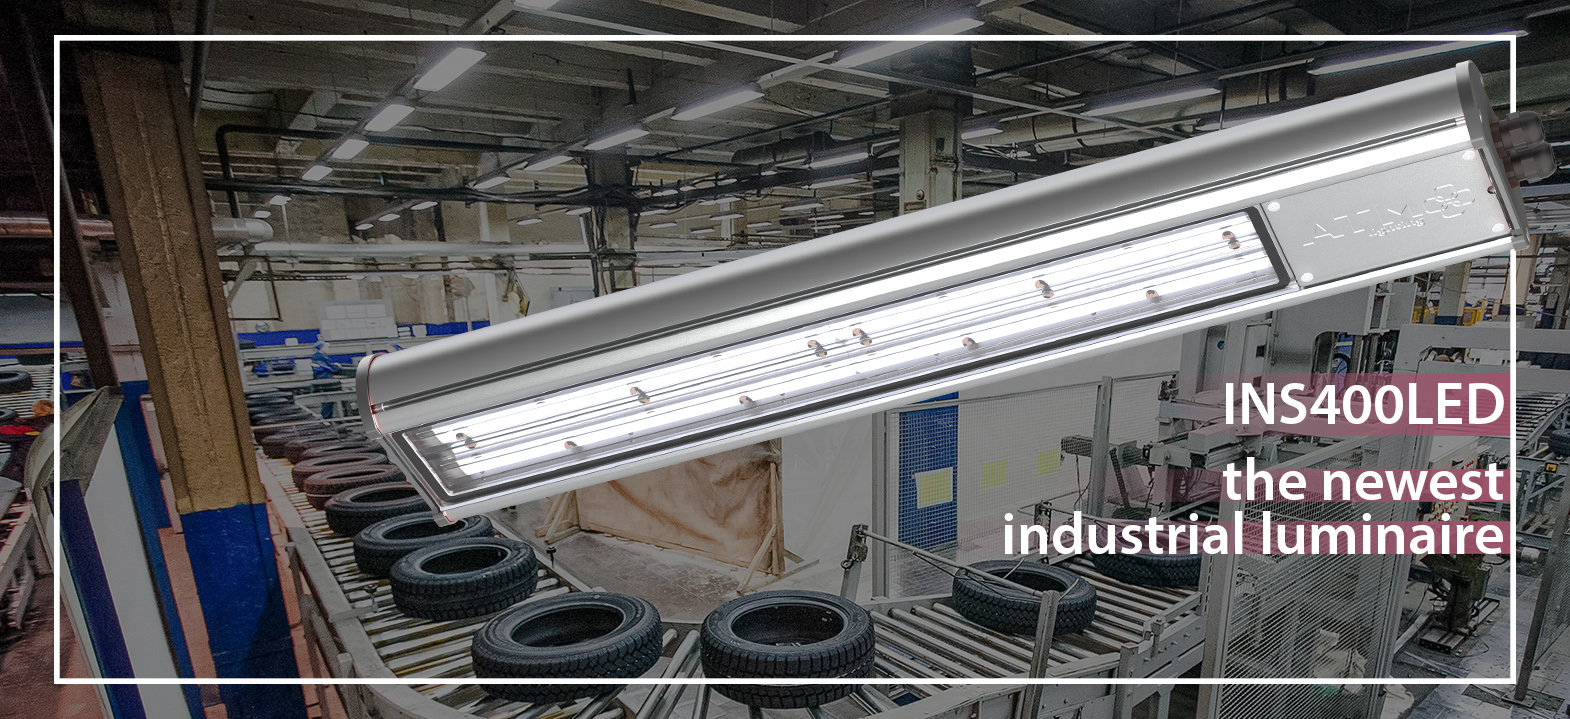 The new INS400LED luminaire for industry!